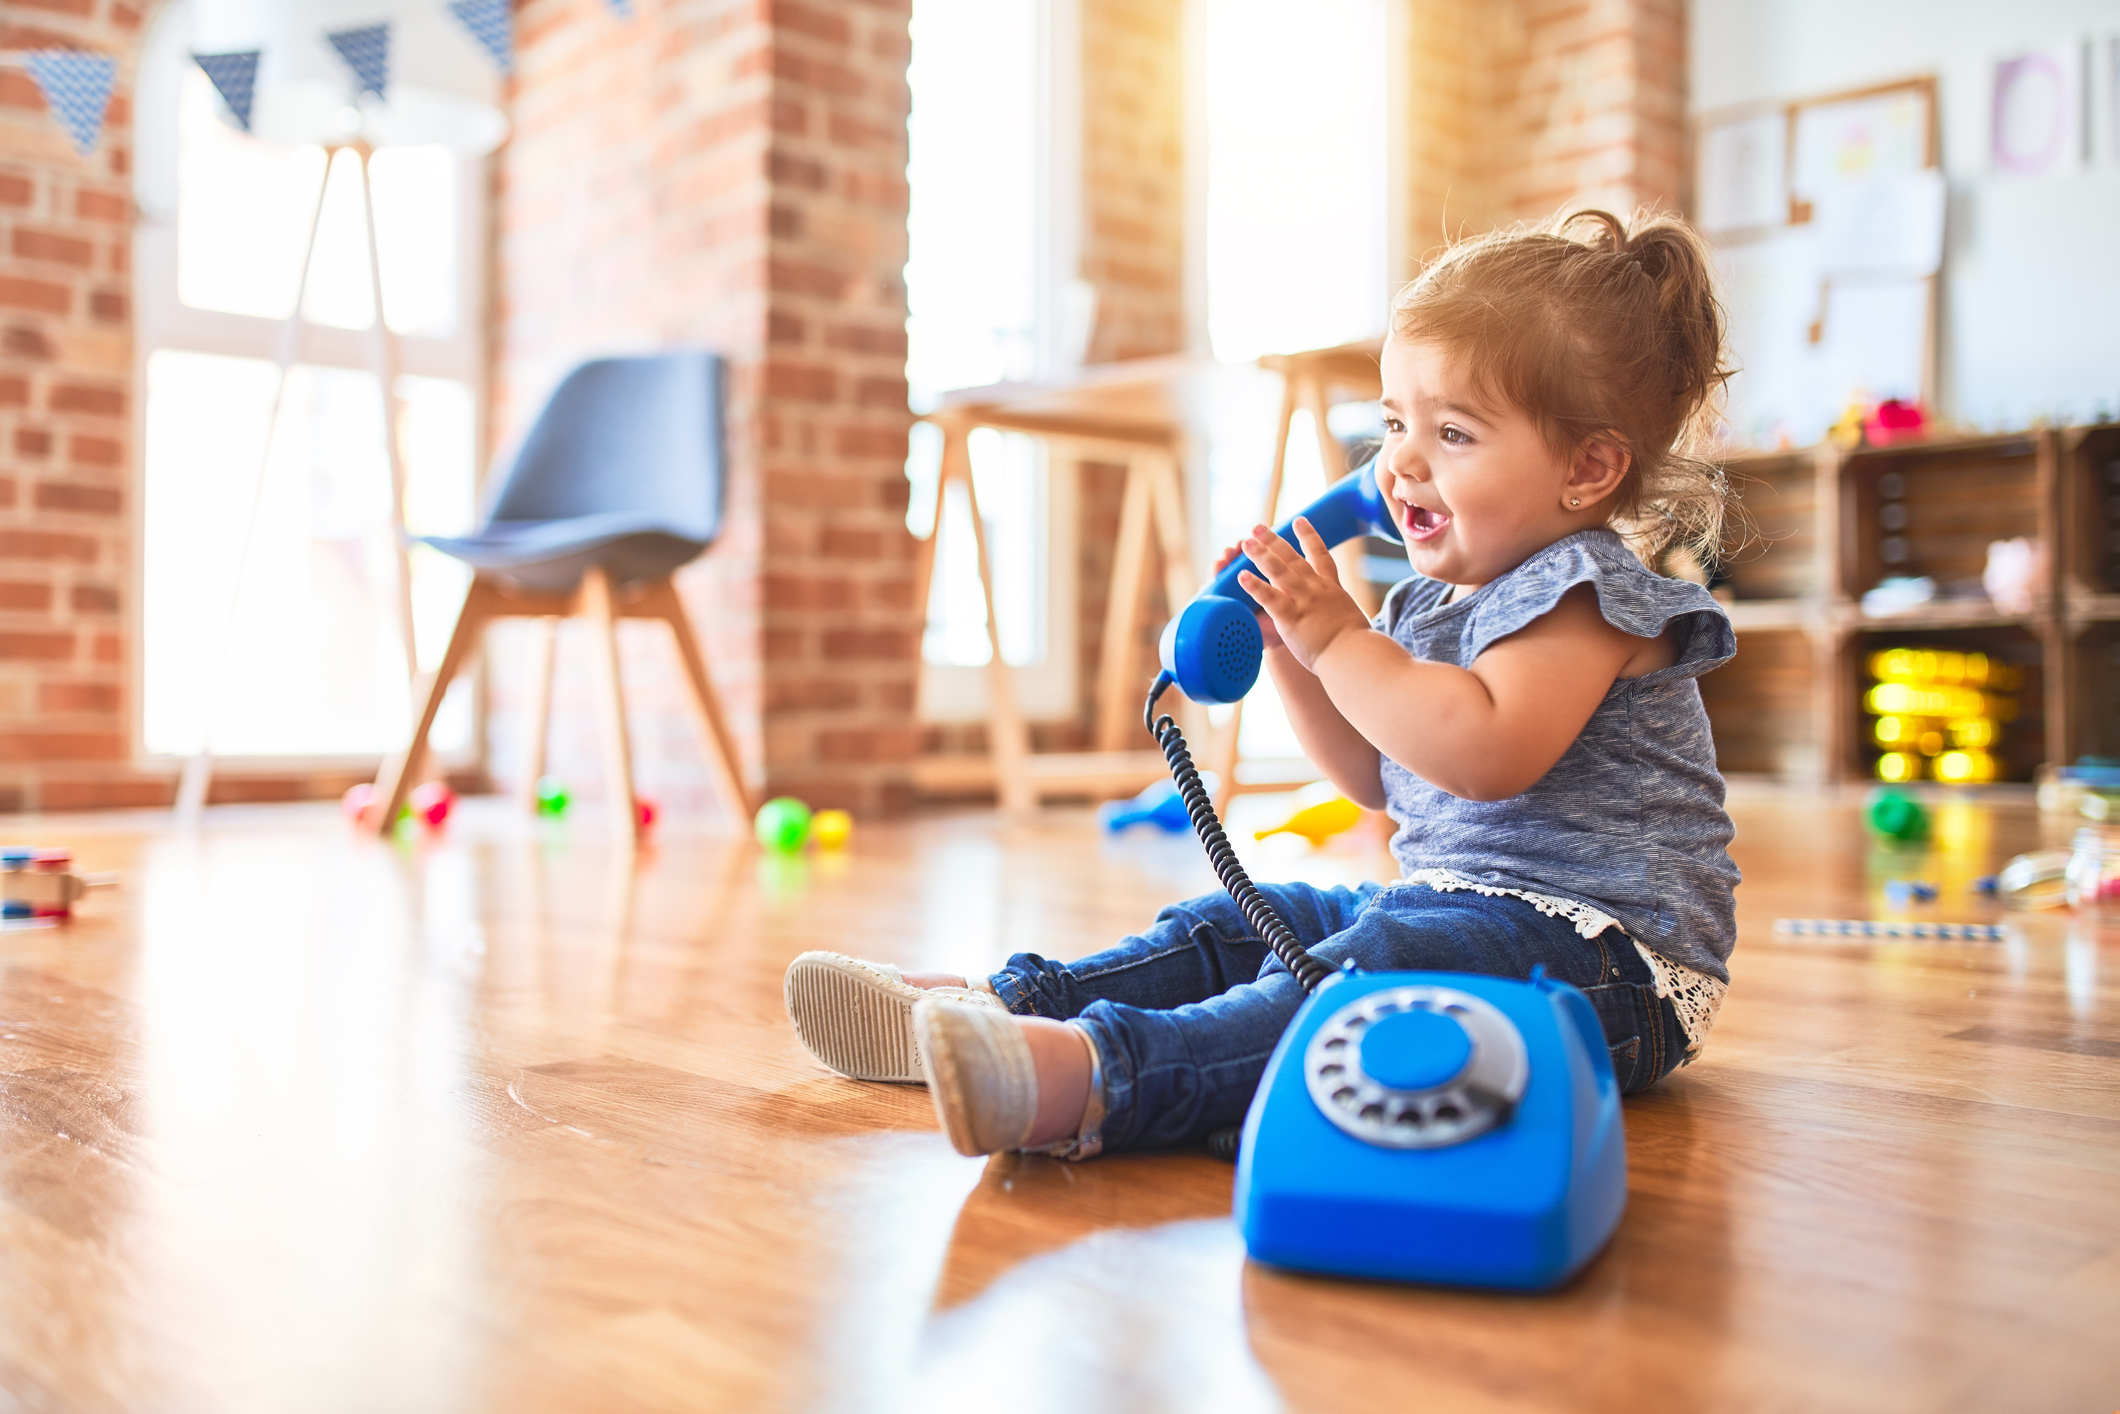 A toddler girl in blue jeans and a frilly blue top plays alone at daycare, pretending to speak into a bright blue toy telephone